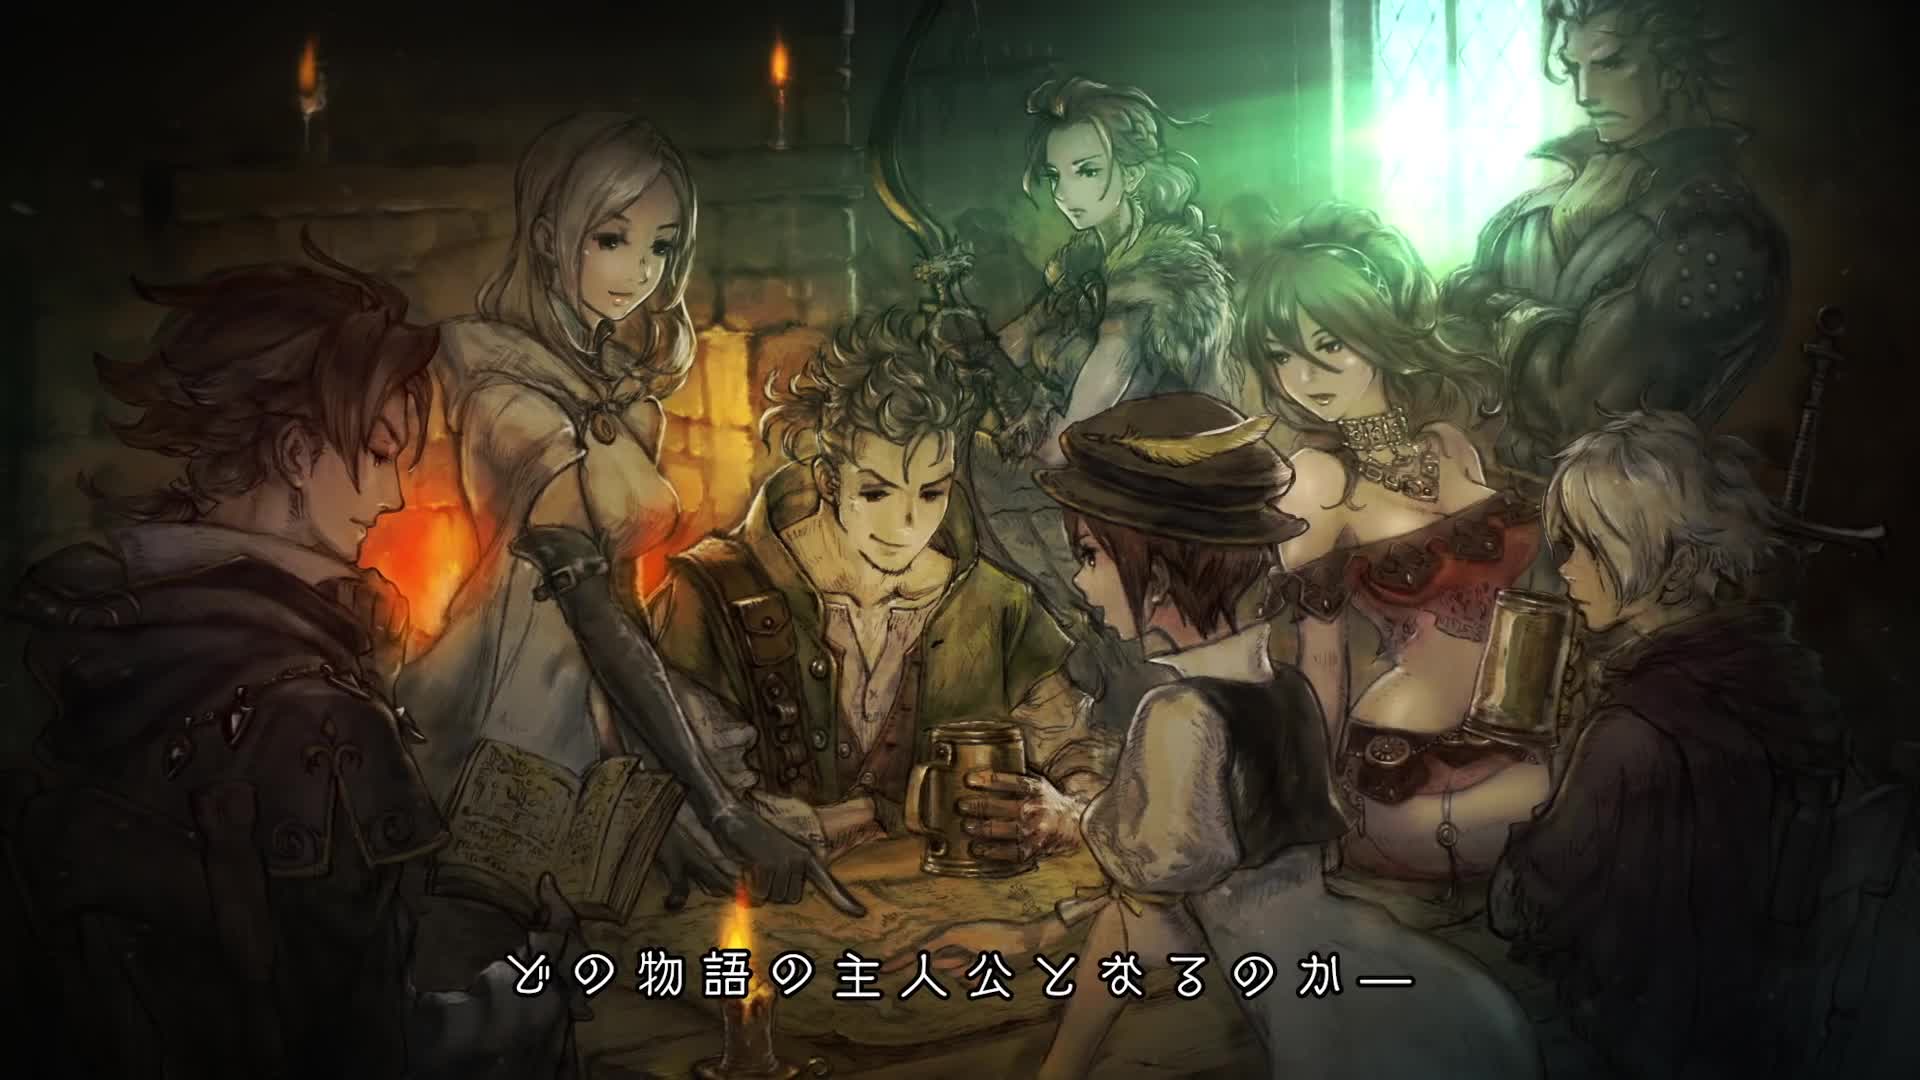 Project Octopath Traveler - Switch teaser